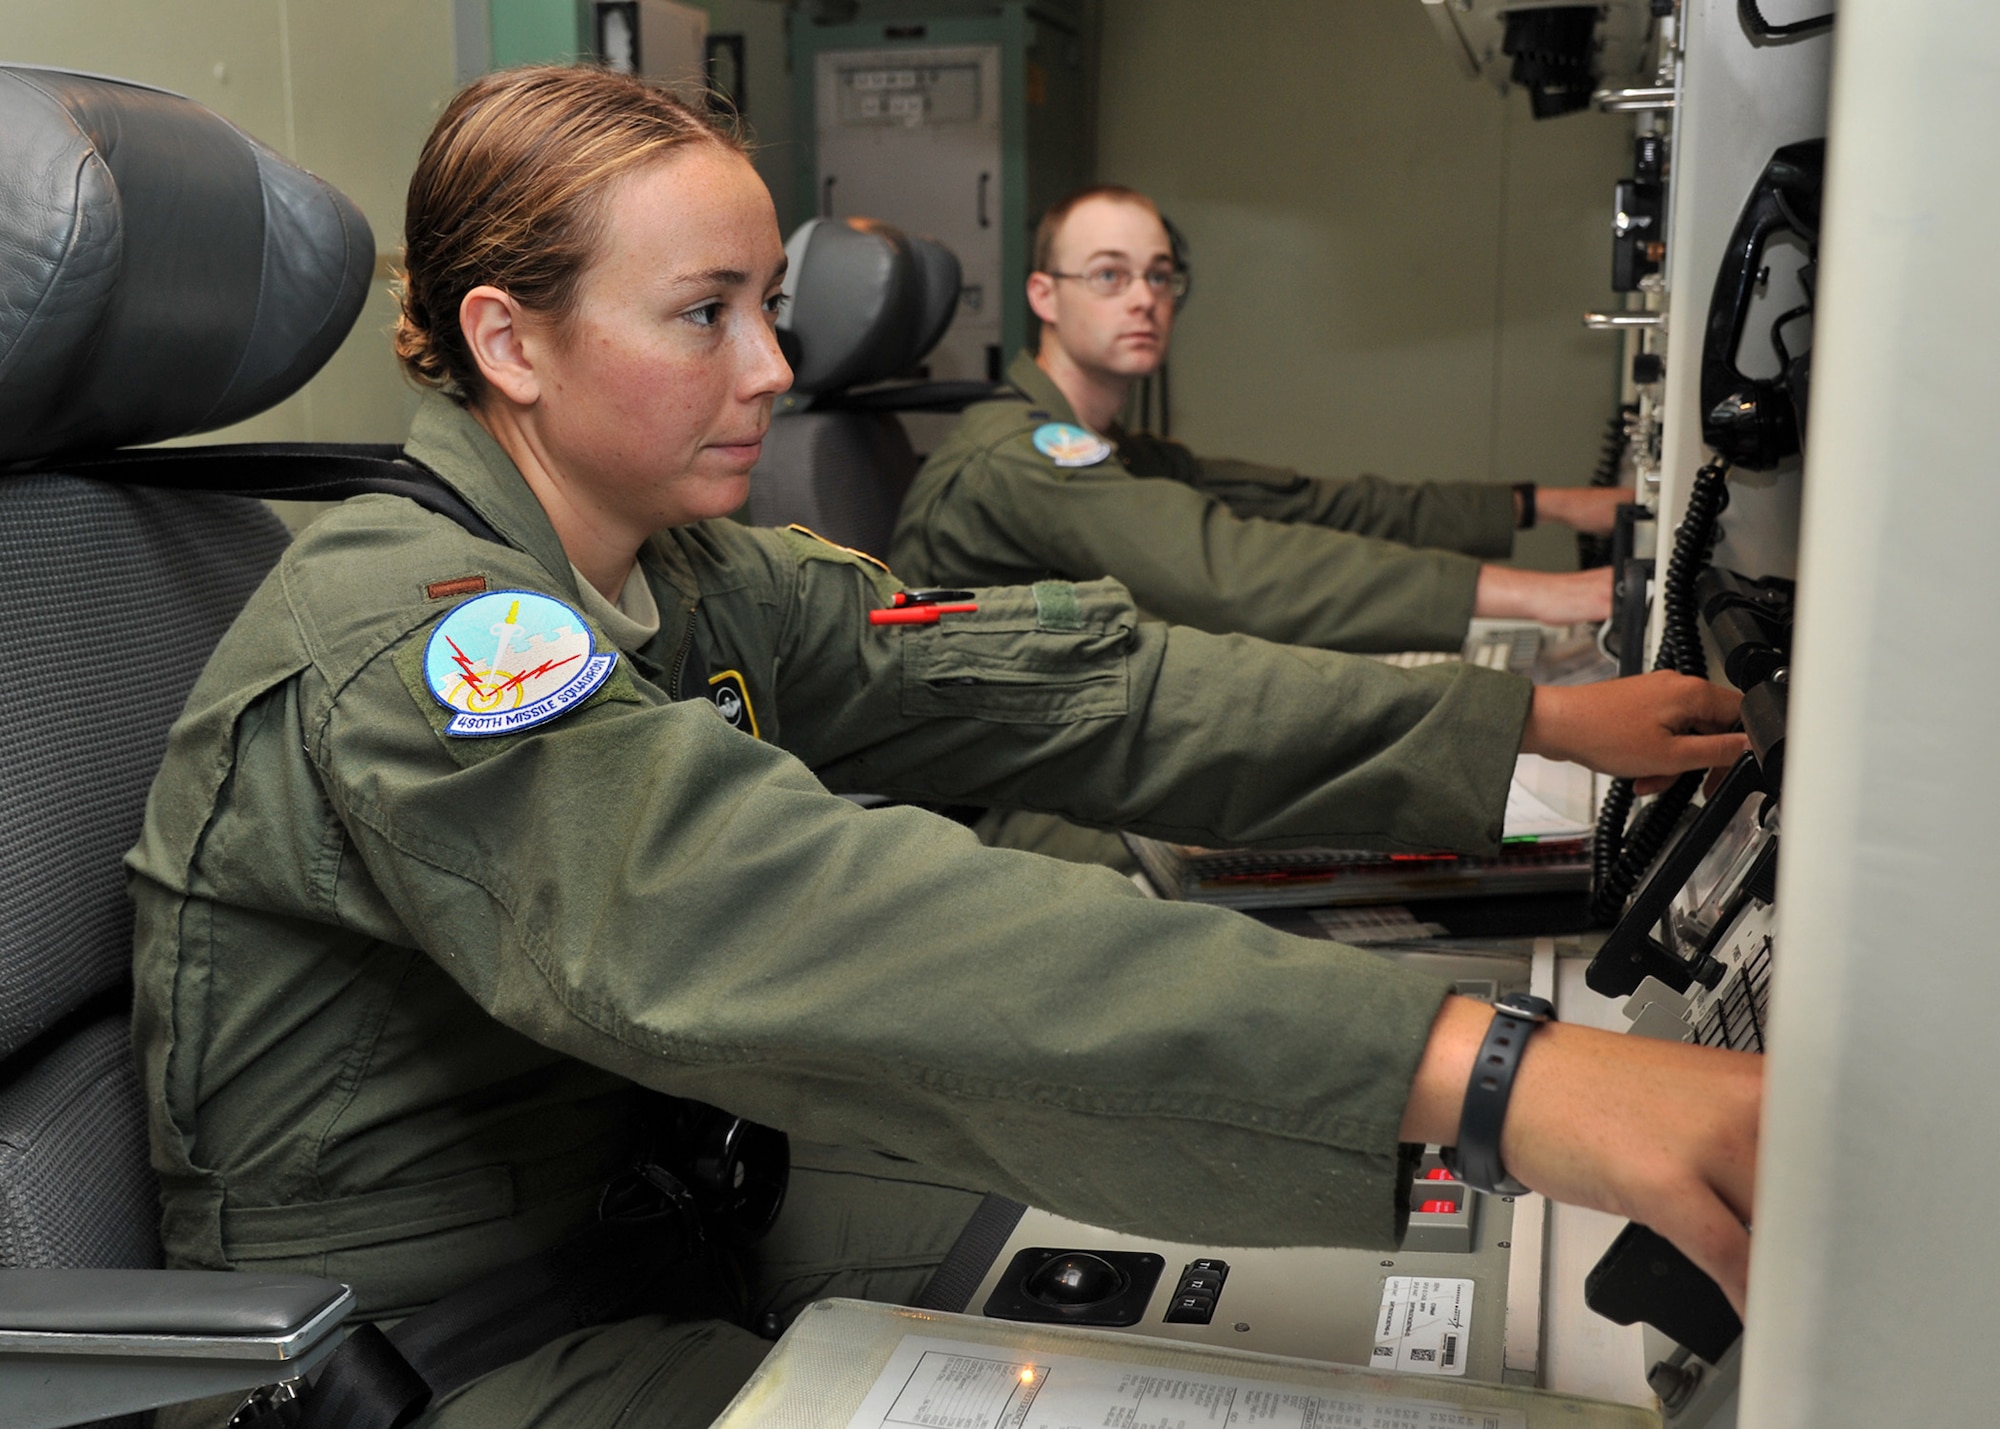 2nd Lt. Angelica Phillips, 490th Missile Squadron deputy crew commander, left, and 1st Lt. Joseph Whelan, 490th MS crew commander, practice coordination of an Emergency War Order action in the missile procedures trainer Aug. 8, 2015, during a training session at Malmstrom Air Force Base, Mont., for Global Strike Challenge 2015. The crew is one of three from the 341st Operations Group that will compete Aug. 31 against Minot AFB, N.D., and F.E. Warren AFB, Wyo., in Air Force Global Strike Command’s annual ICBM Operations competition. (U.S. Air Force photo/ John Turner)